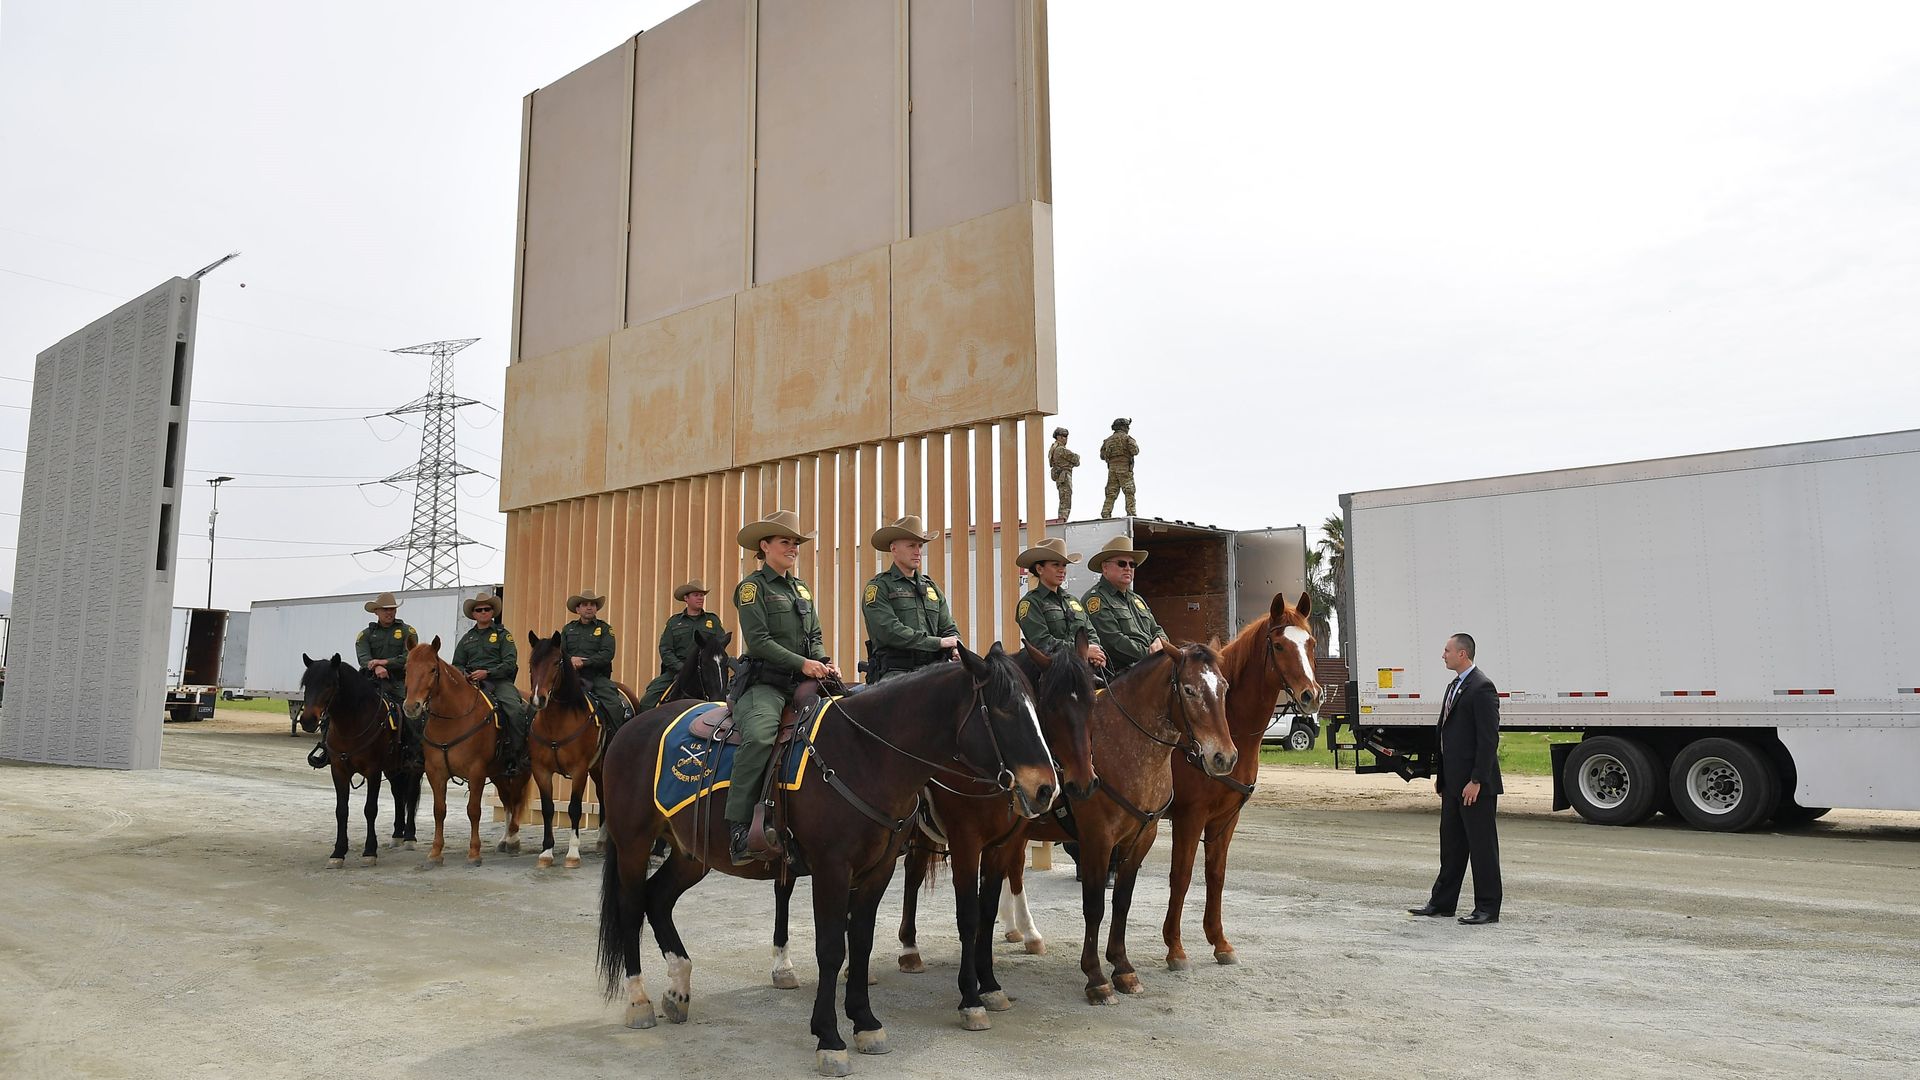 Mounted Border Patrol agents on horseback in front of a prototype of Trump's border wall